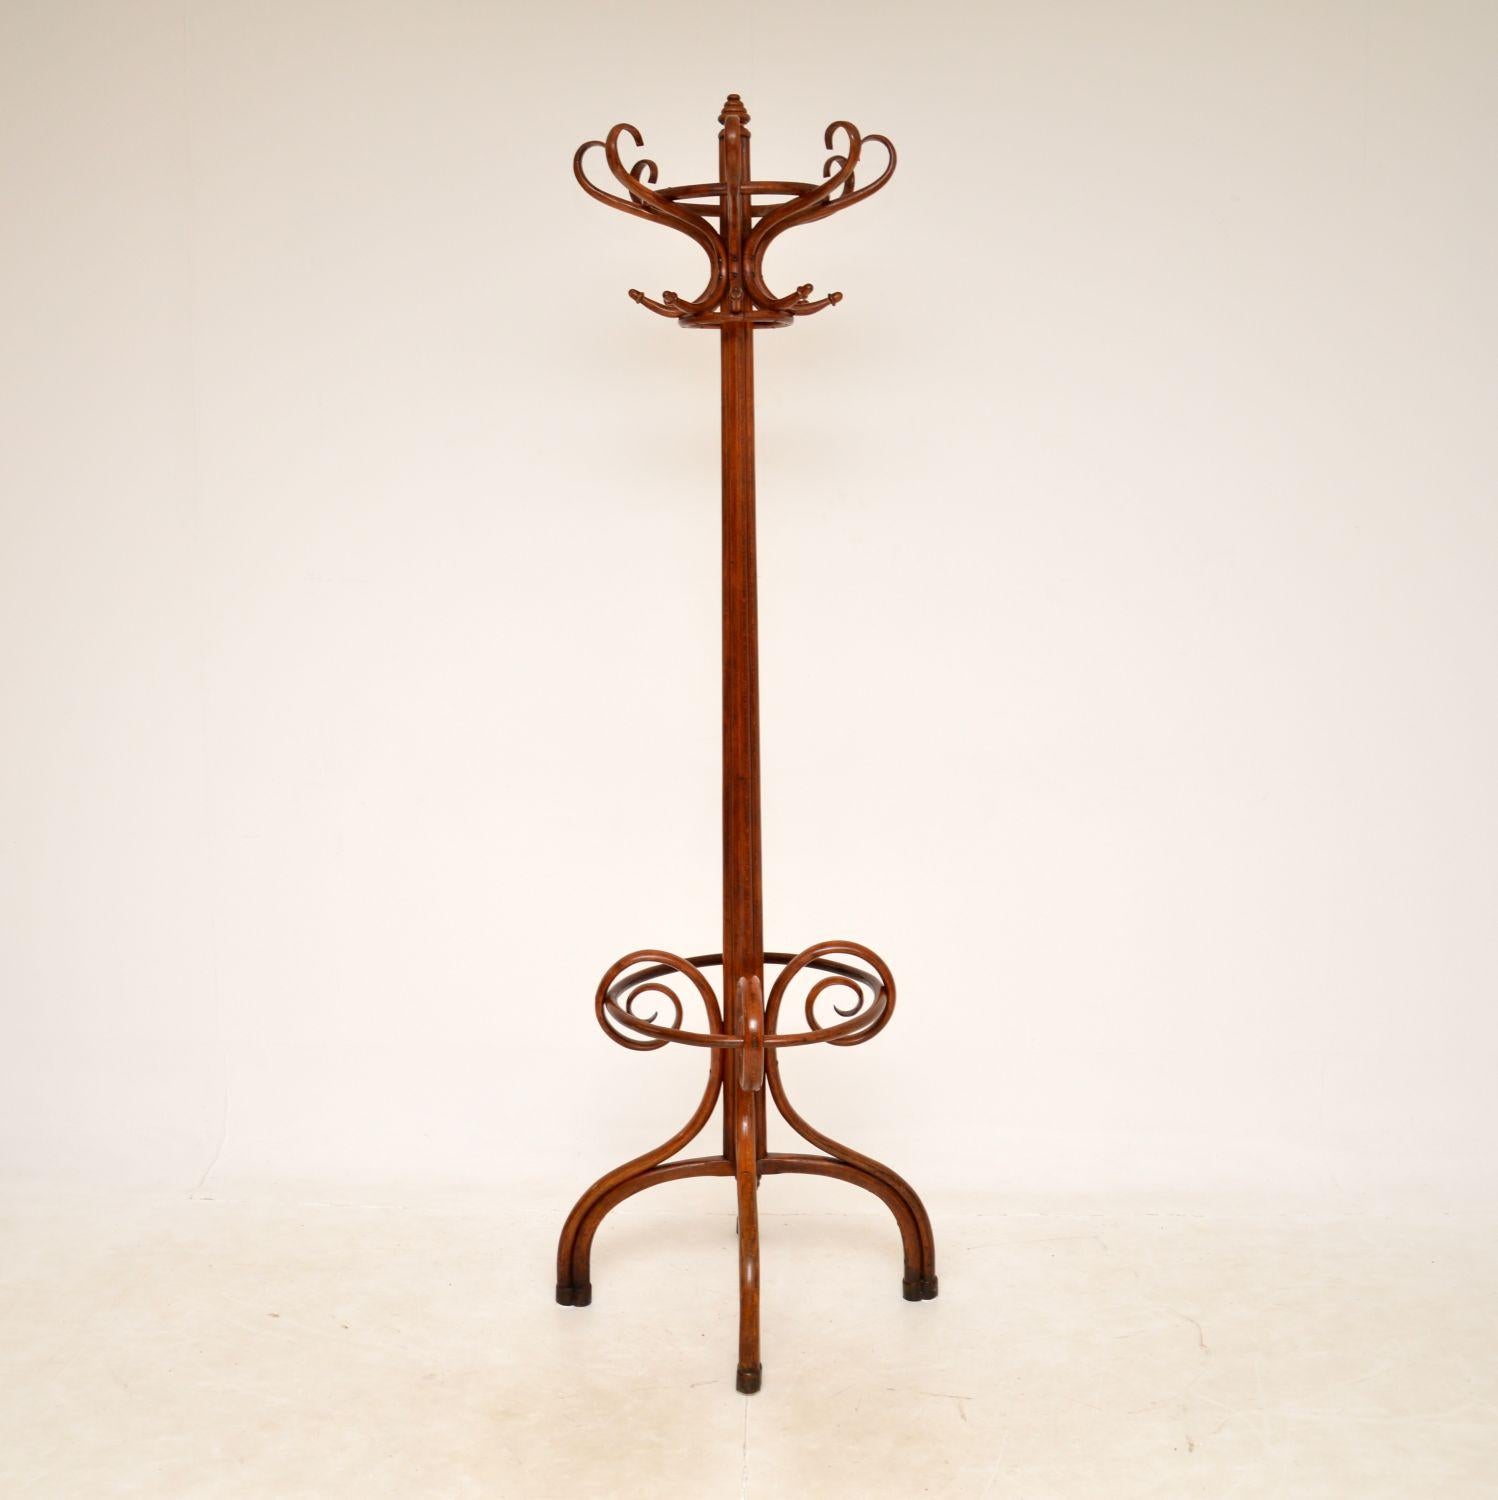 An amazing original antique bentwood hat stand. This was made in central Europe, most likely by Thonet in Austria around the 1890-1910 period.

It is a fantastic model, with a very wide and beautifully curvaceous base. It has eight beautifully